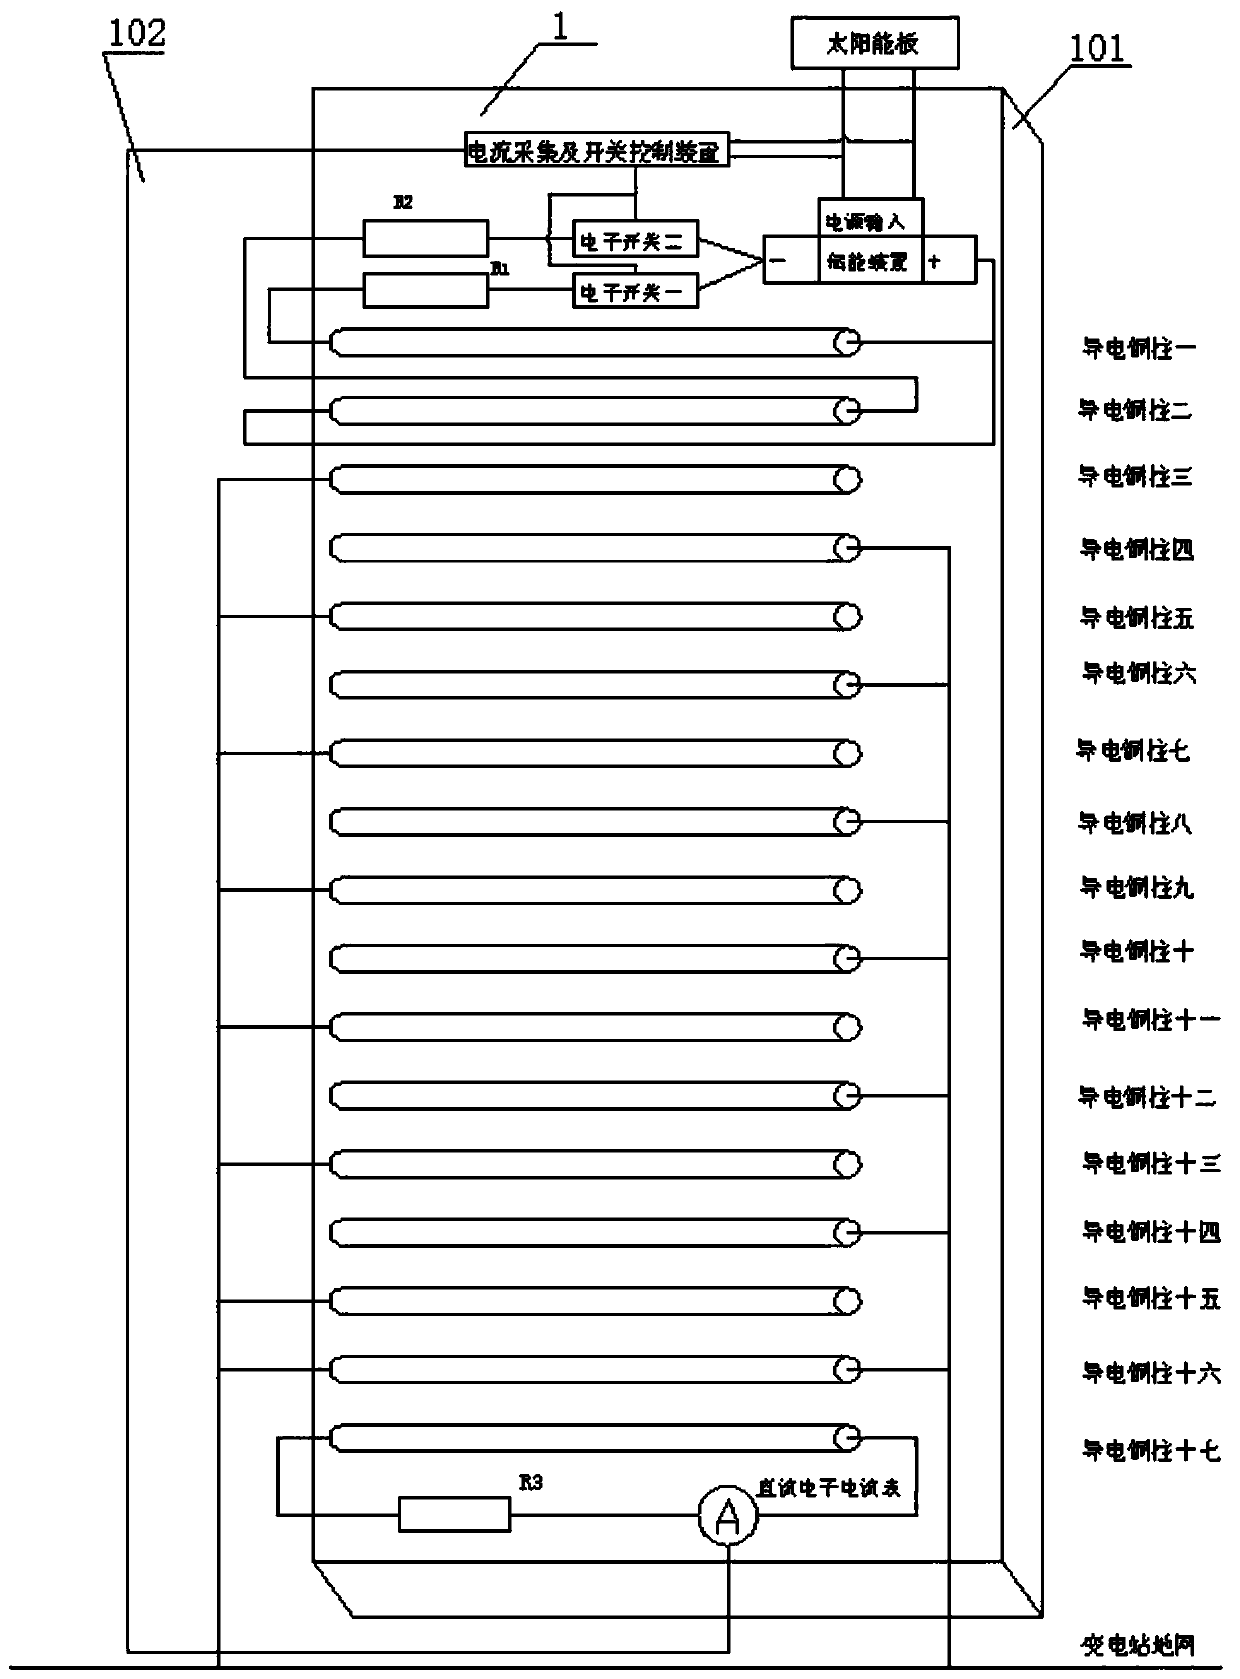 Method of Using Cable Cover to Reduce Interference of Communication Cables in Substation